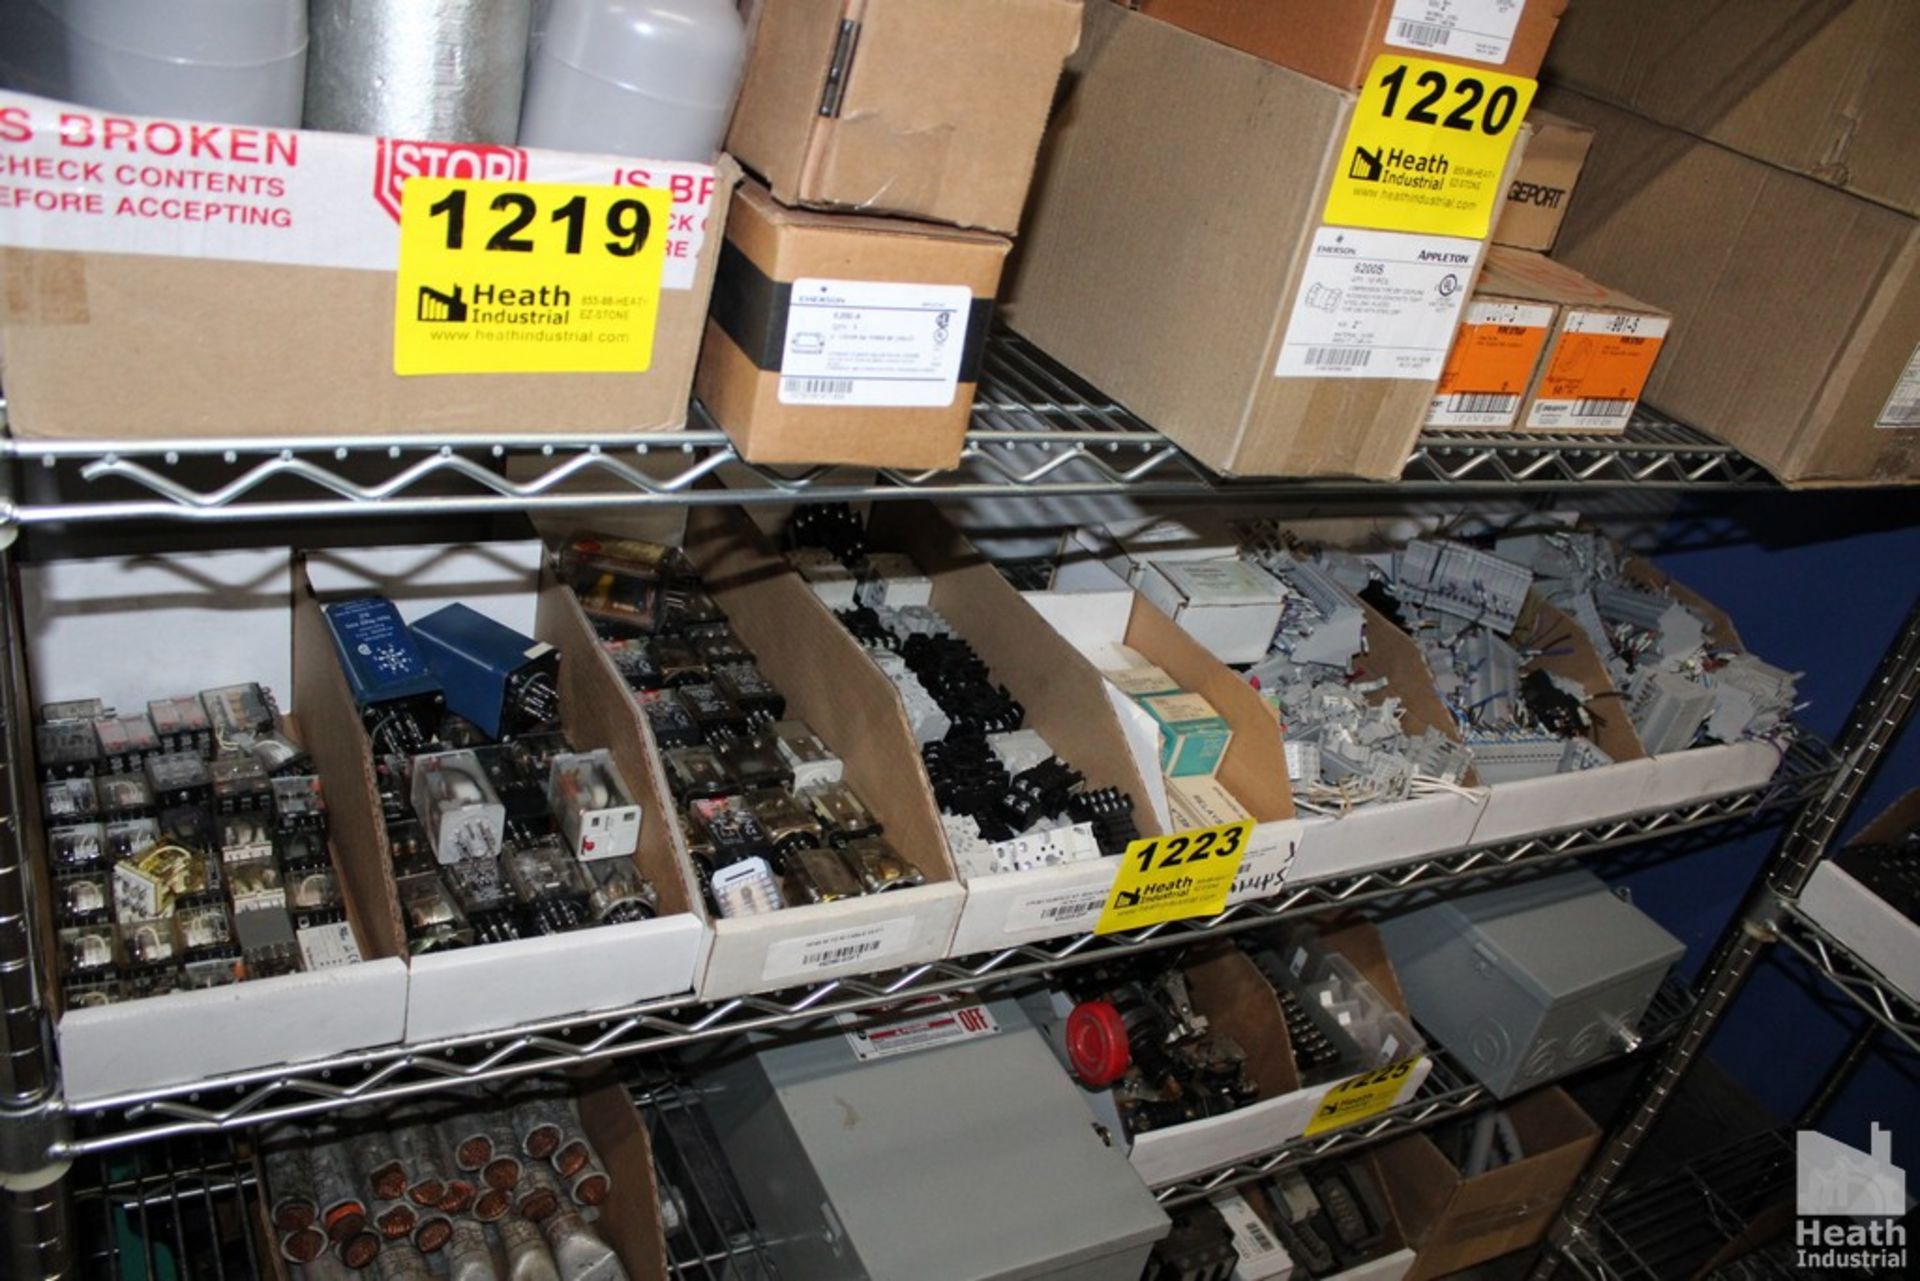 LARGE QUANTITY OF ELECTRICAL SUPPLIES ON SHELF